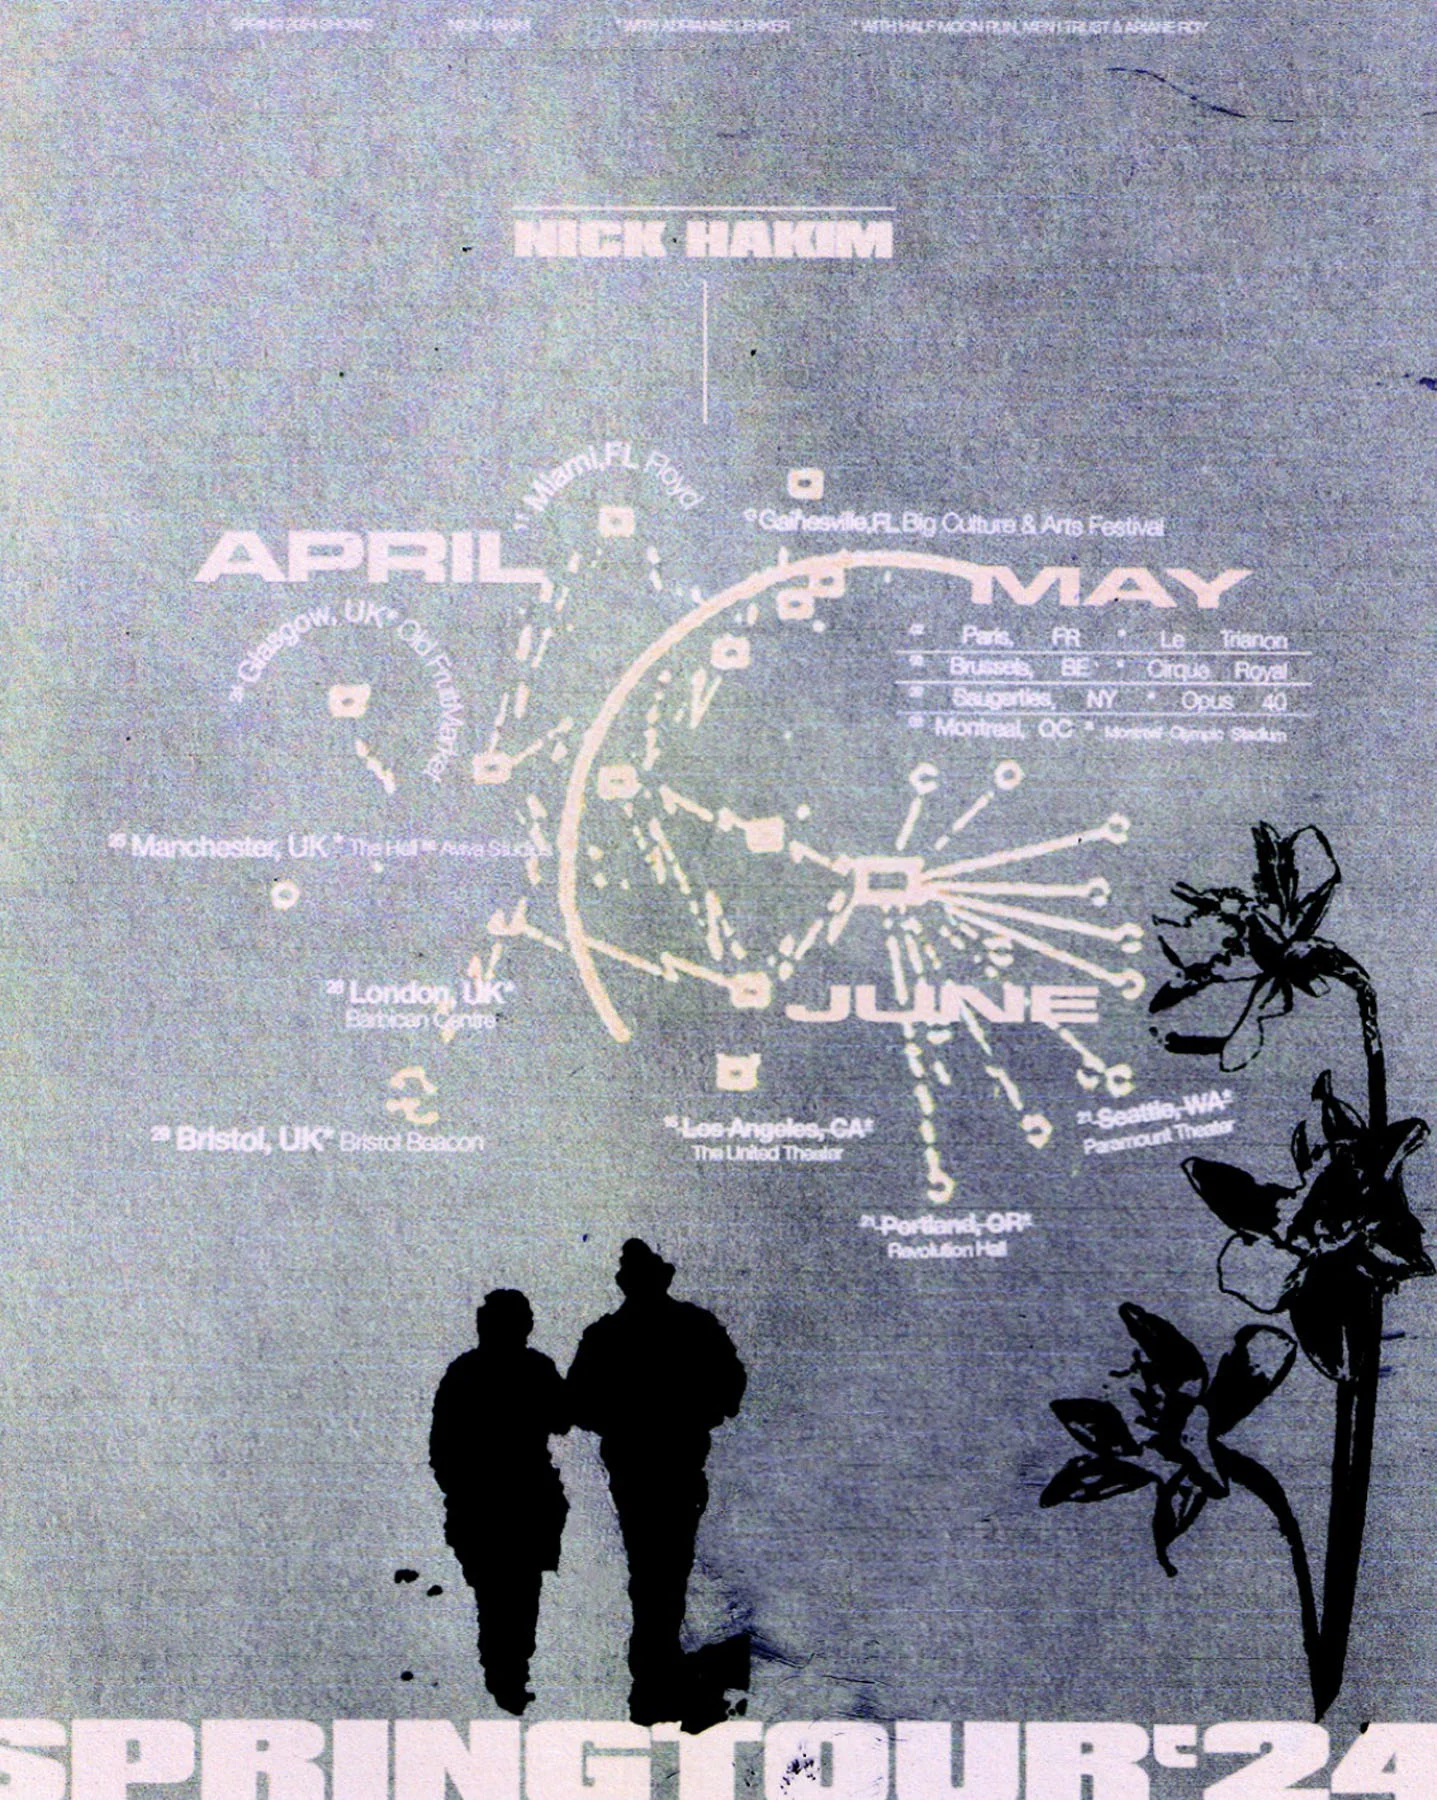 A collage poster for a music tour. Featuring a map-like structure with lines connecting different cities, placed above a silhouette graphic of 2 people walking while embracing each other. The background has a textured, fabric-like appearance, and there's also an illustration of flowers along the right side.